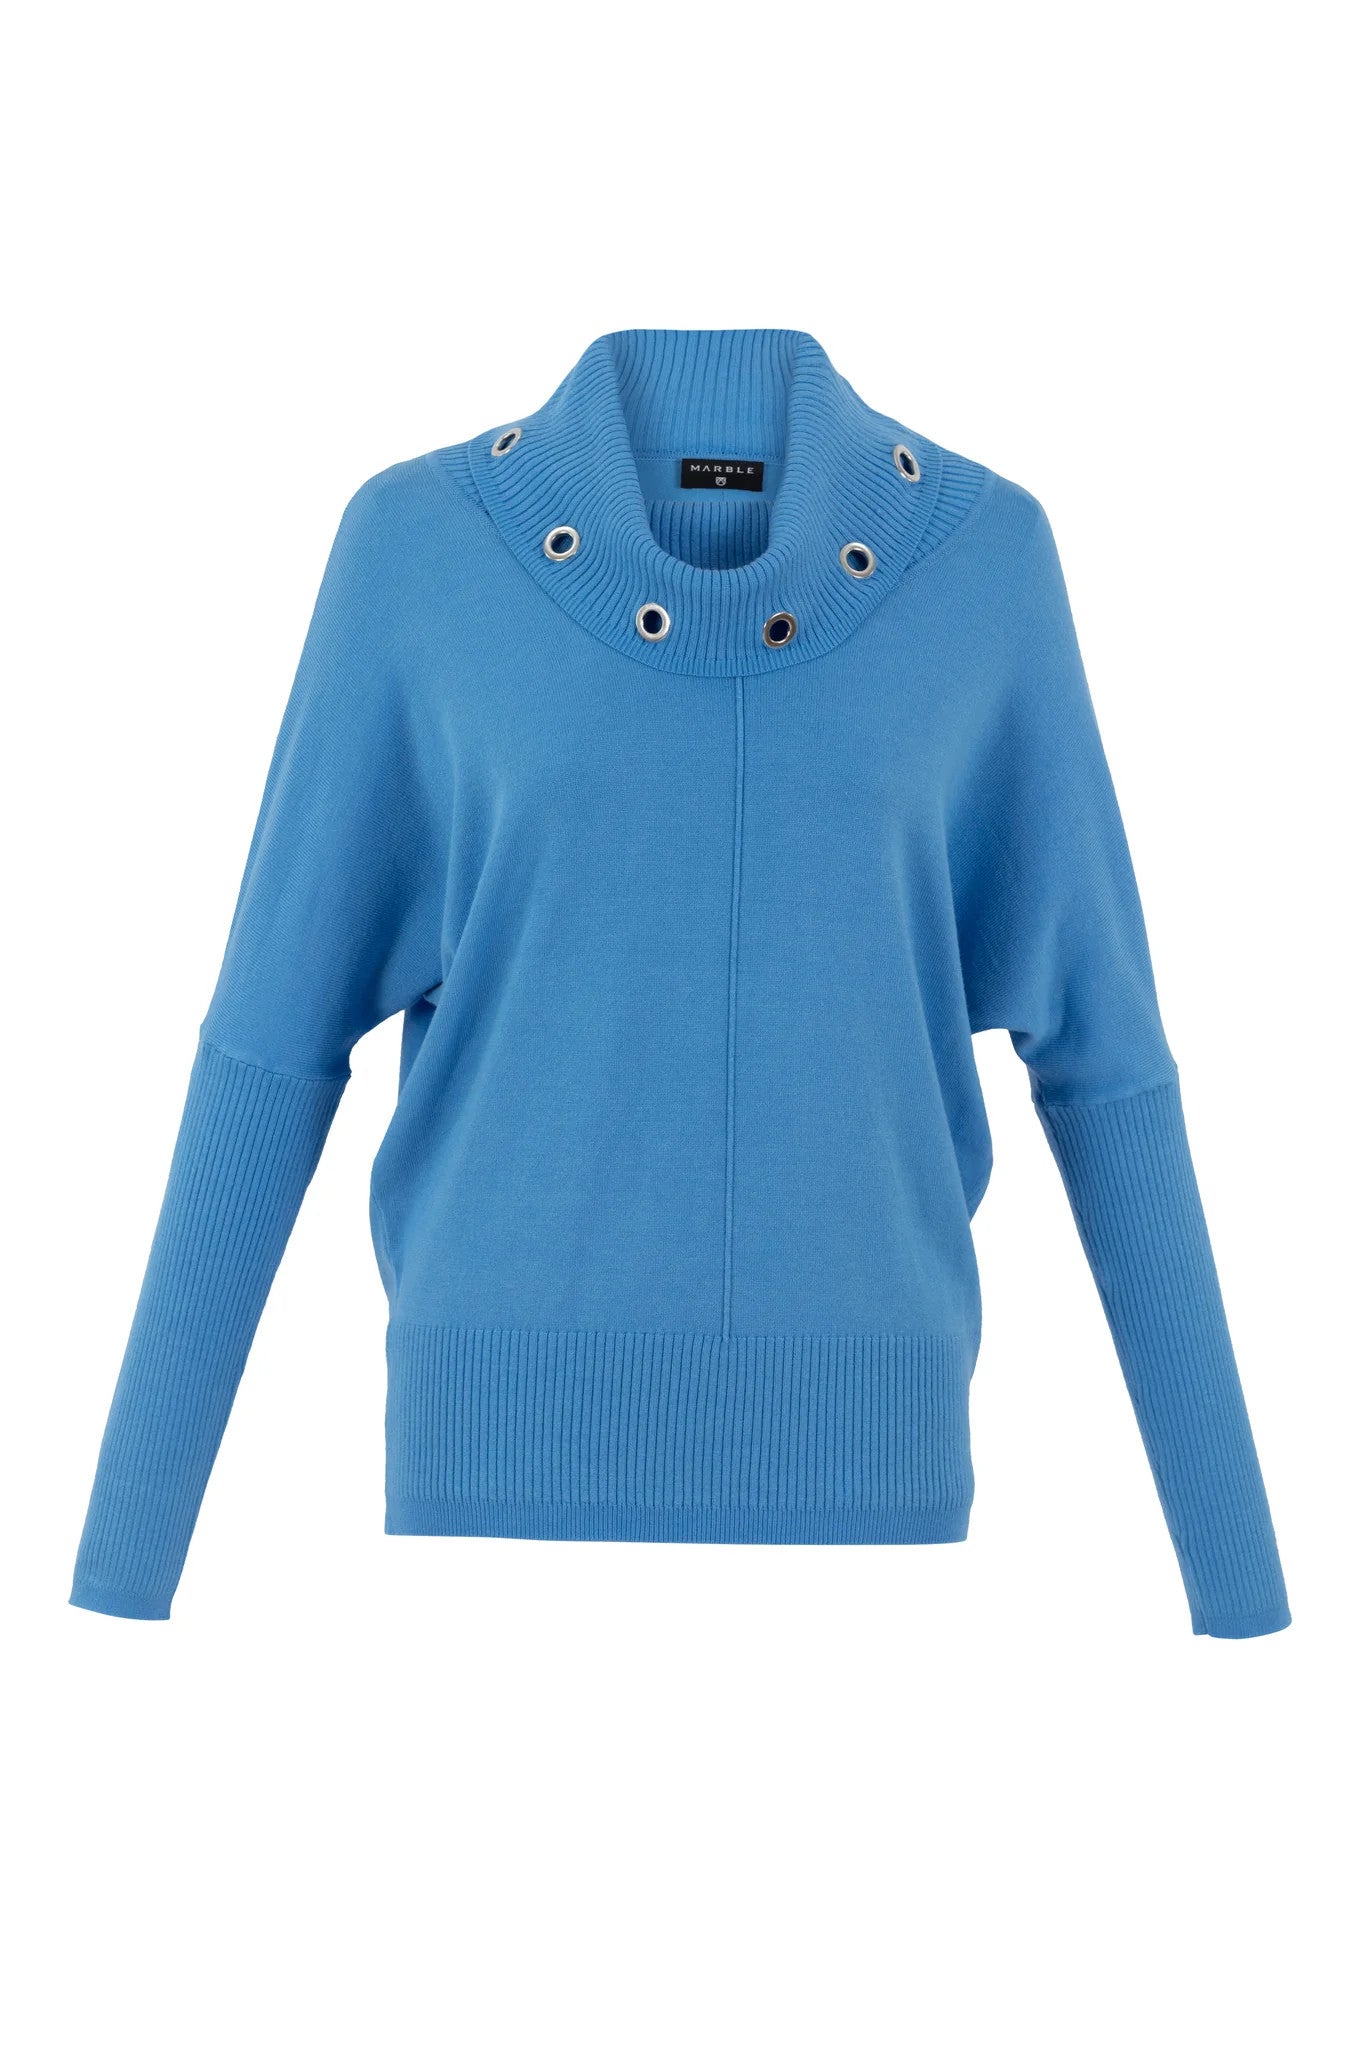 Women’s Sweater 7125 (Two Colors)